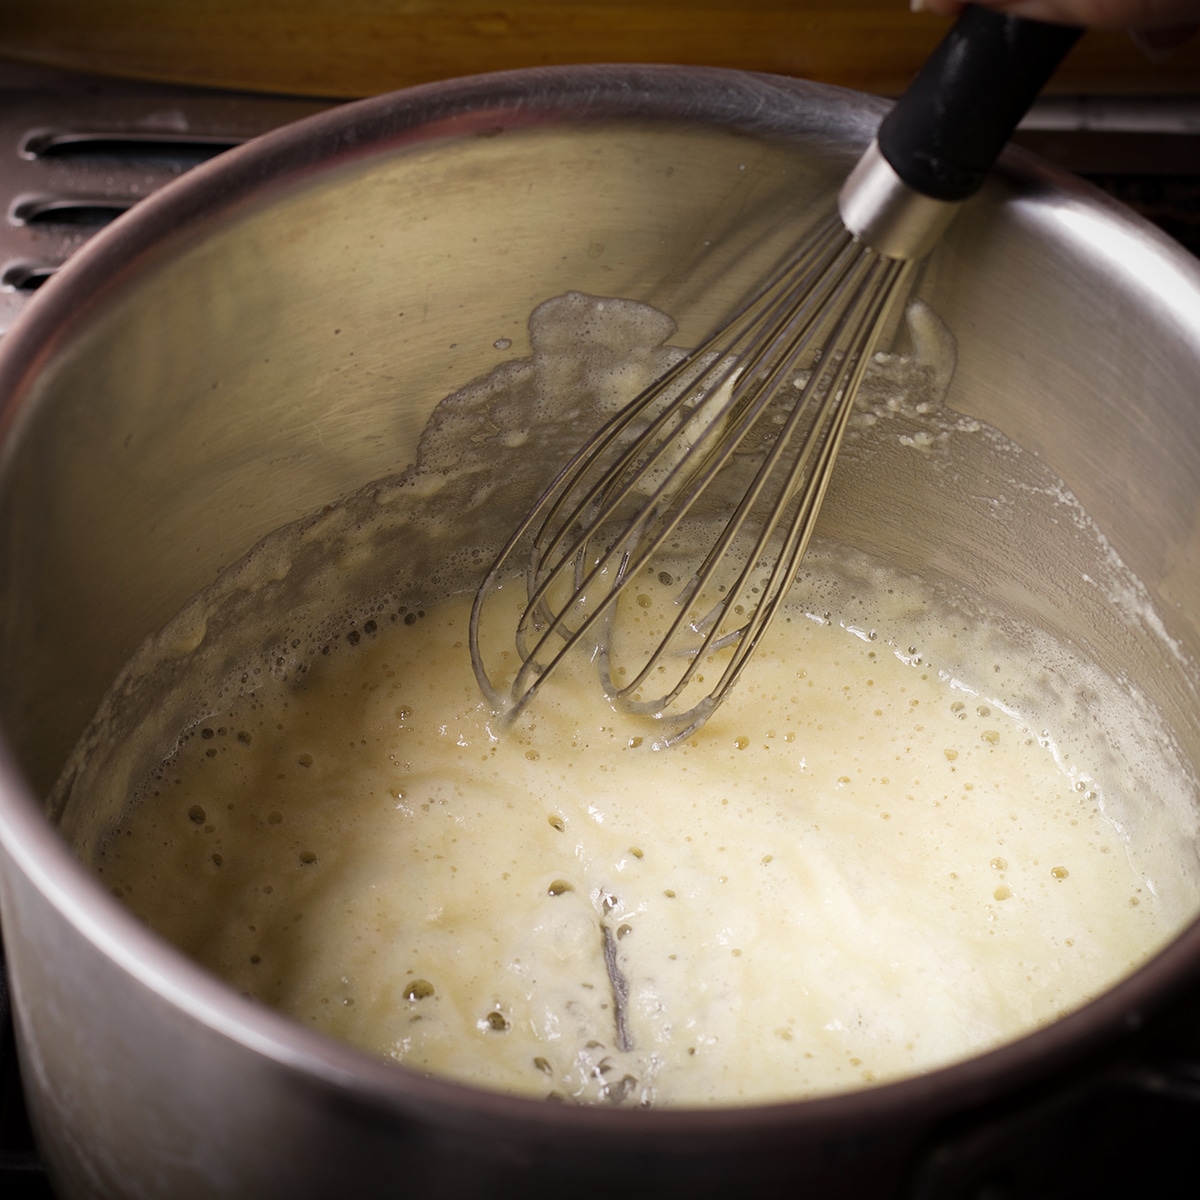 Flour and butter cooking in a saucepan on the stovetop to make a roux.